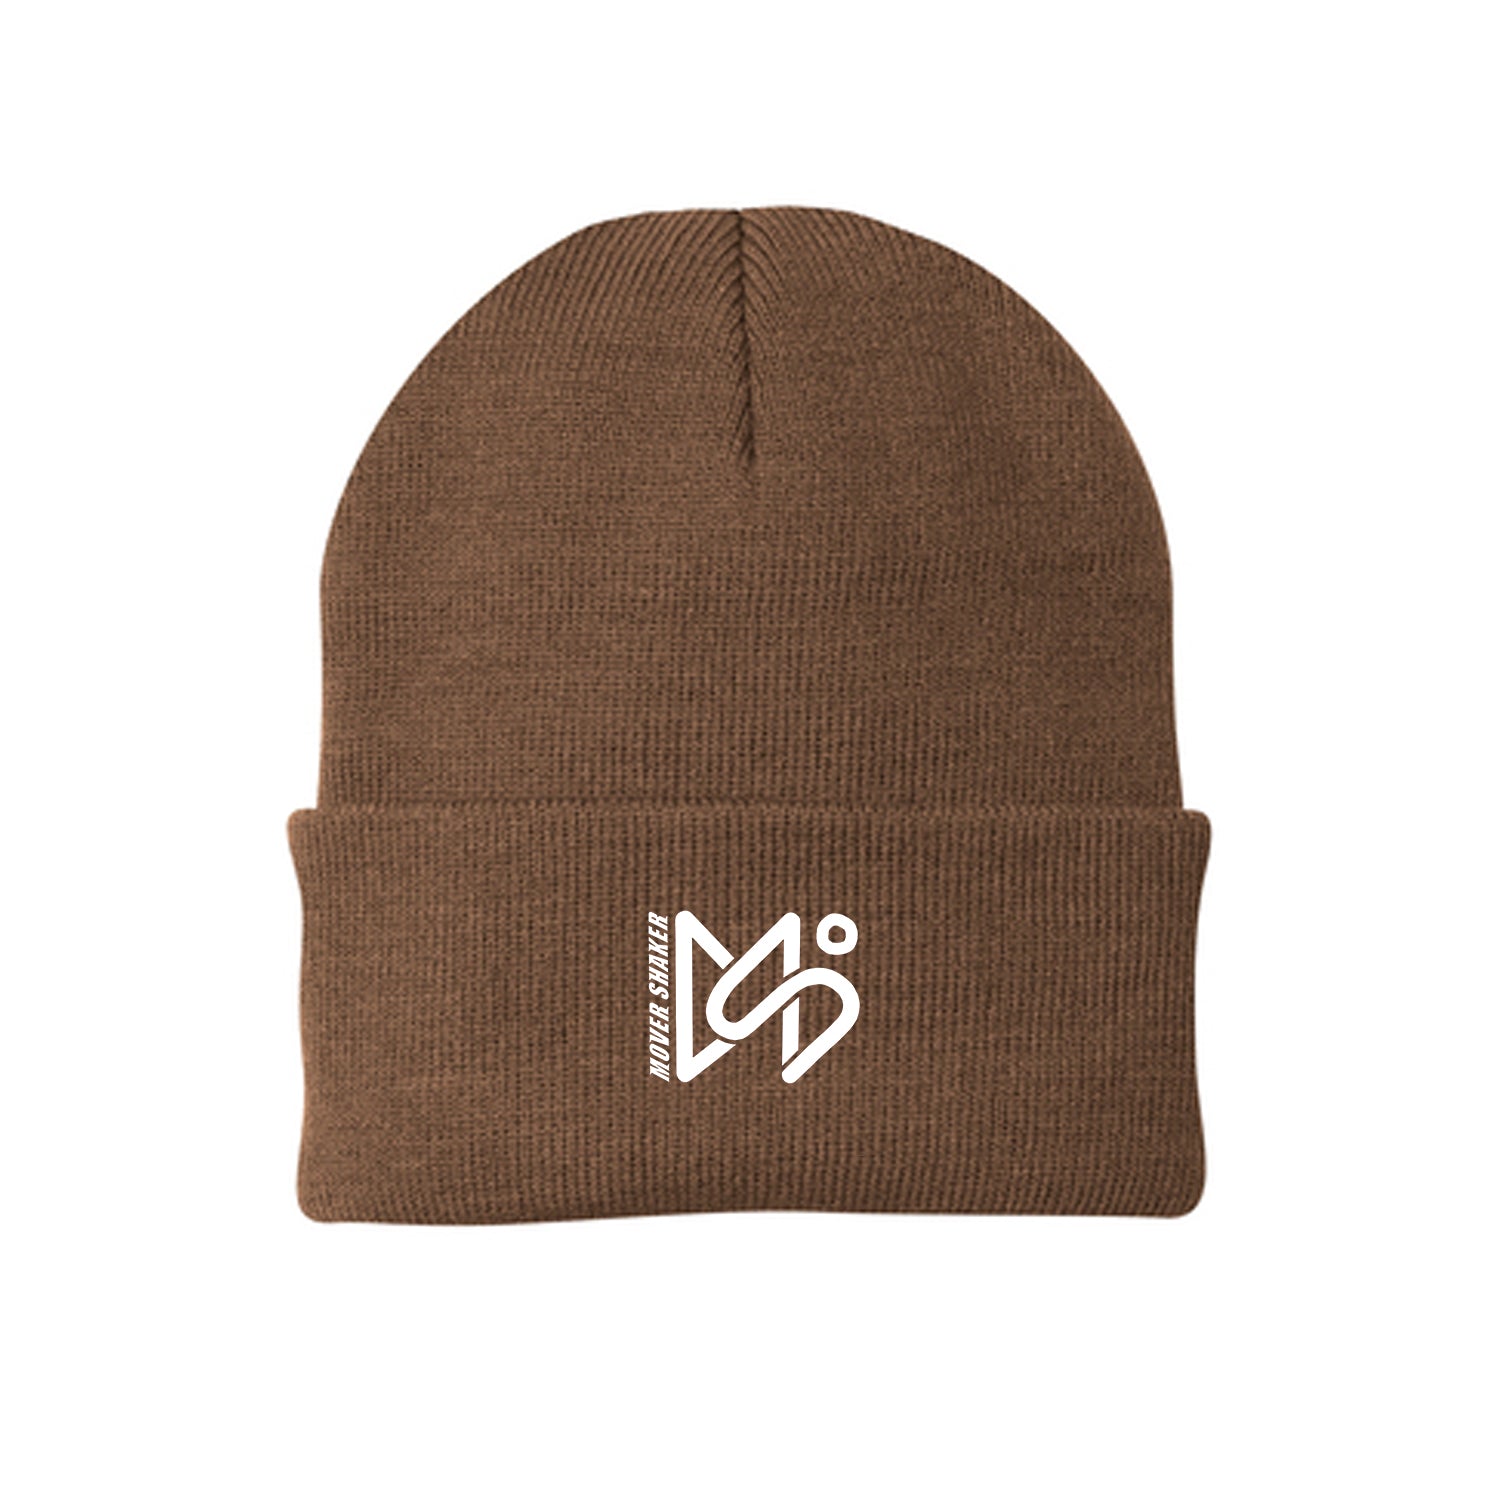 Mover Shaker - Embroidered Logo Beanie